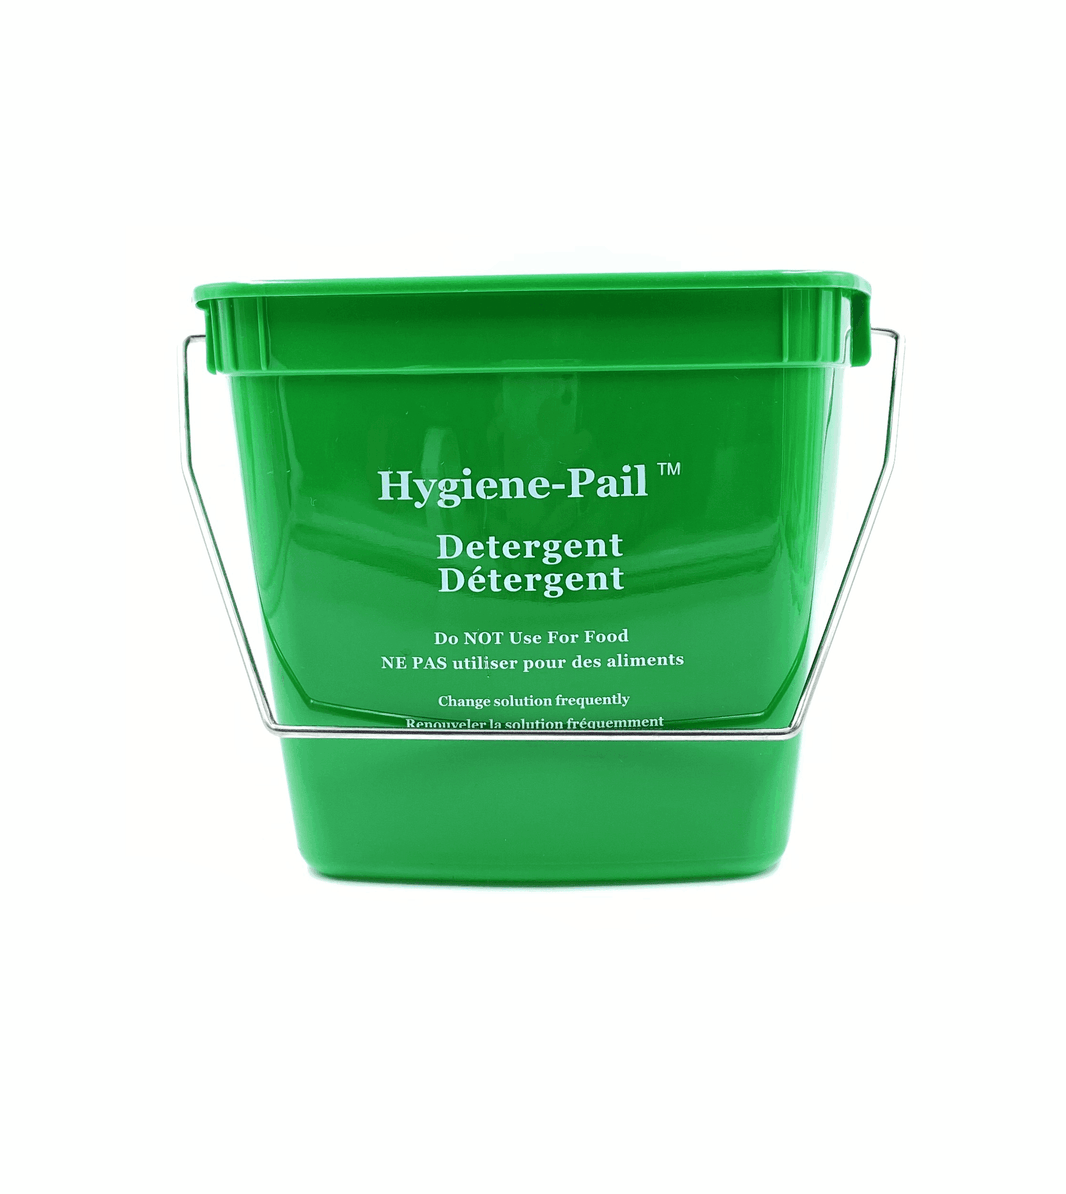 Green 6 Quart Cleaning Bucket For Home Or Commercial Use / KNICER